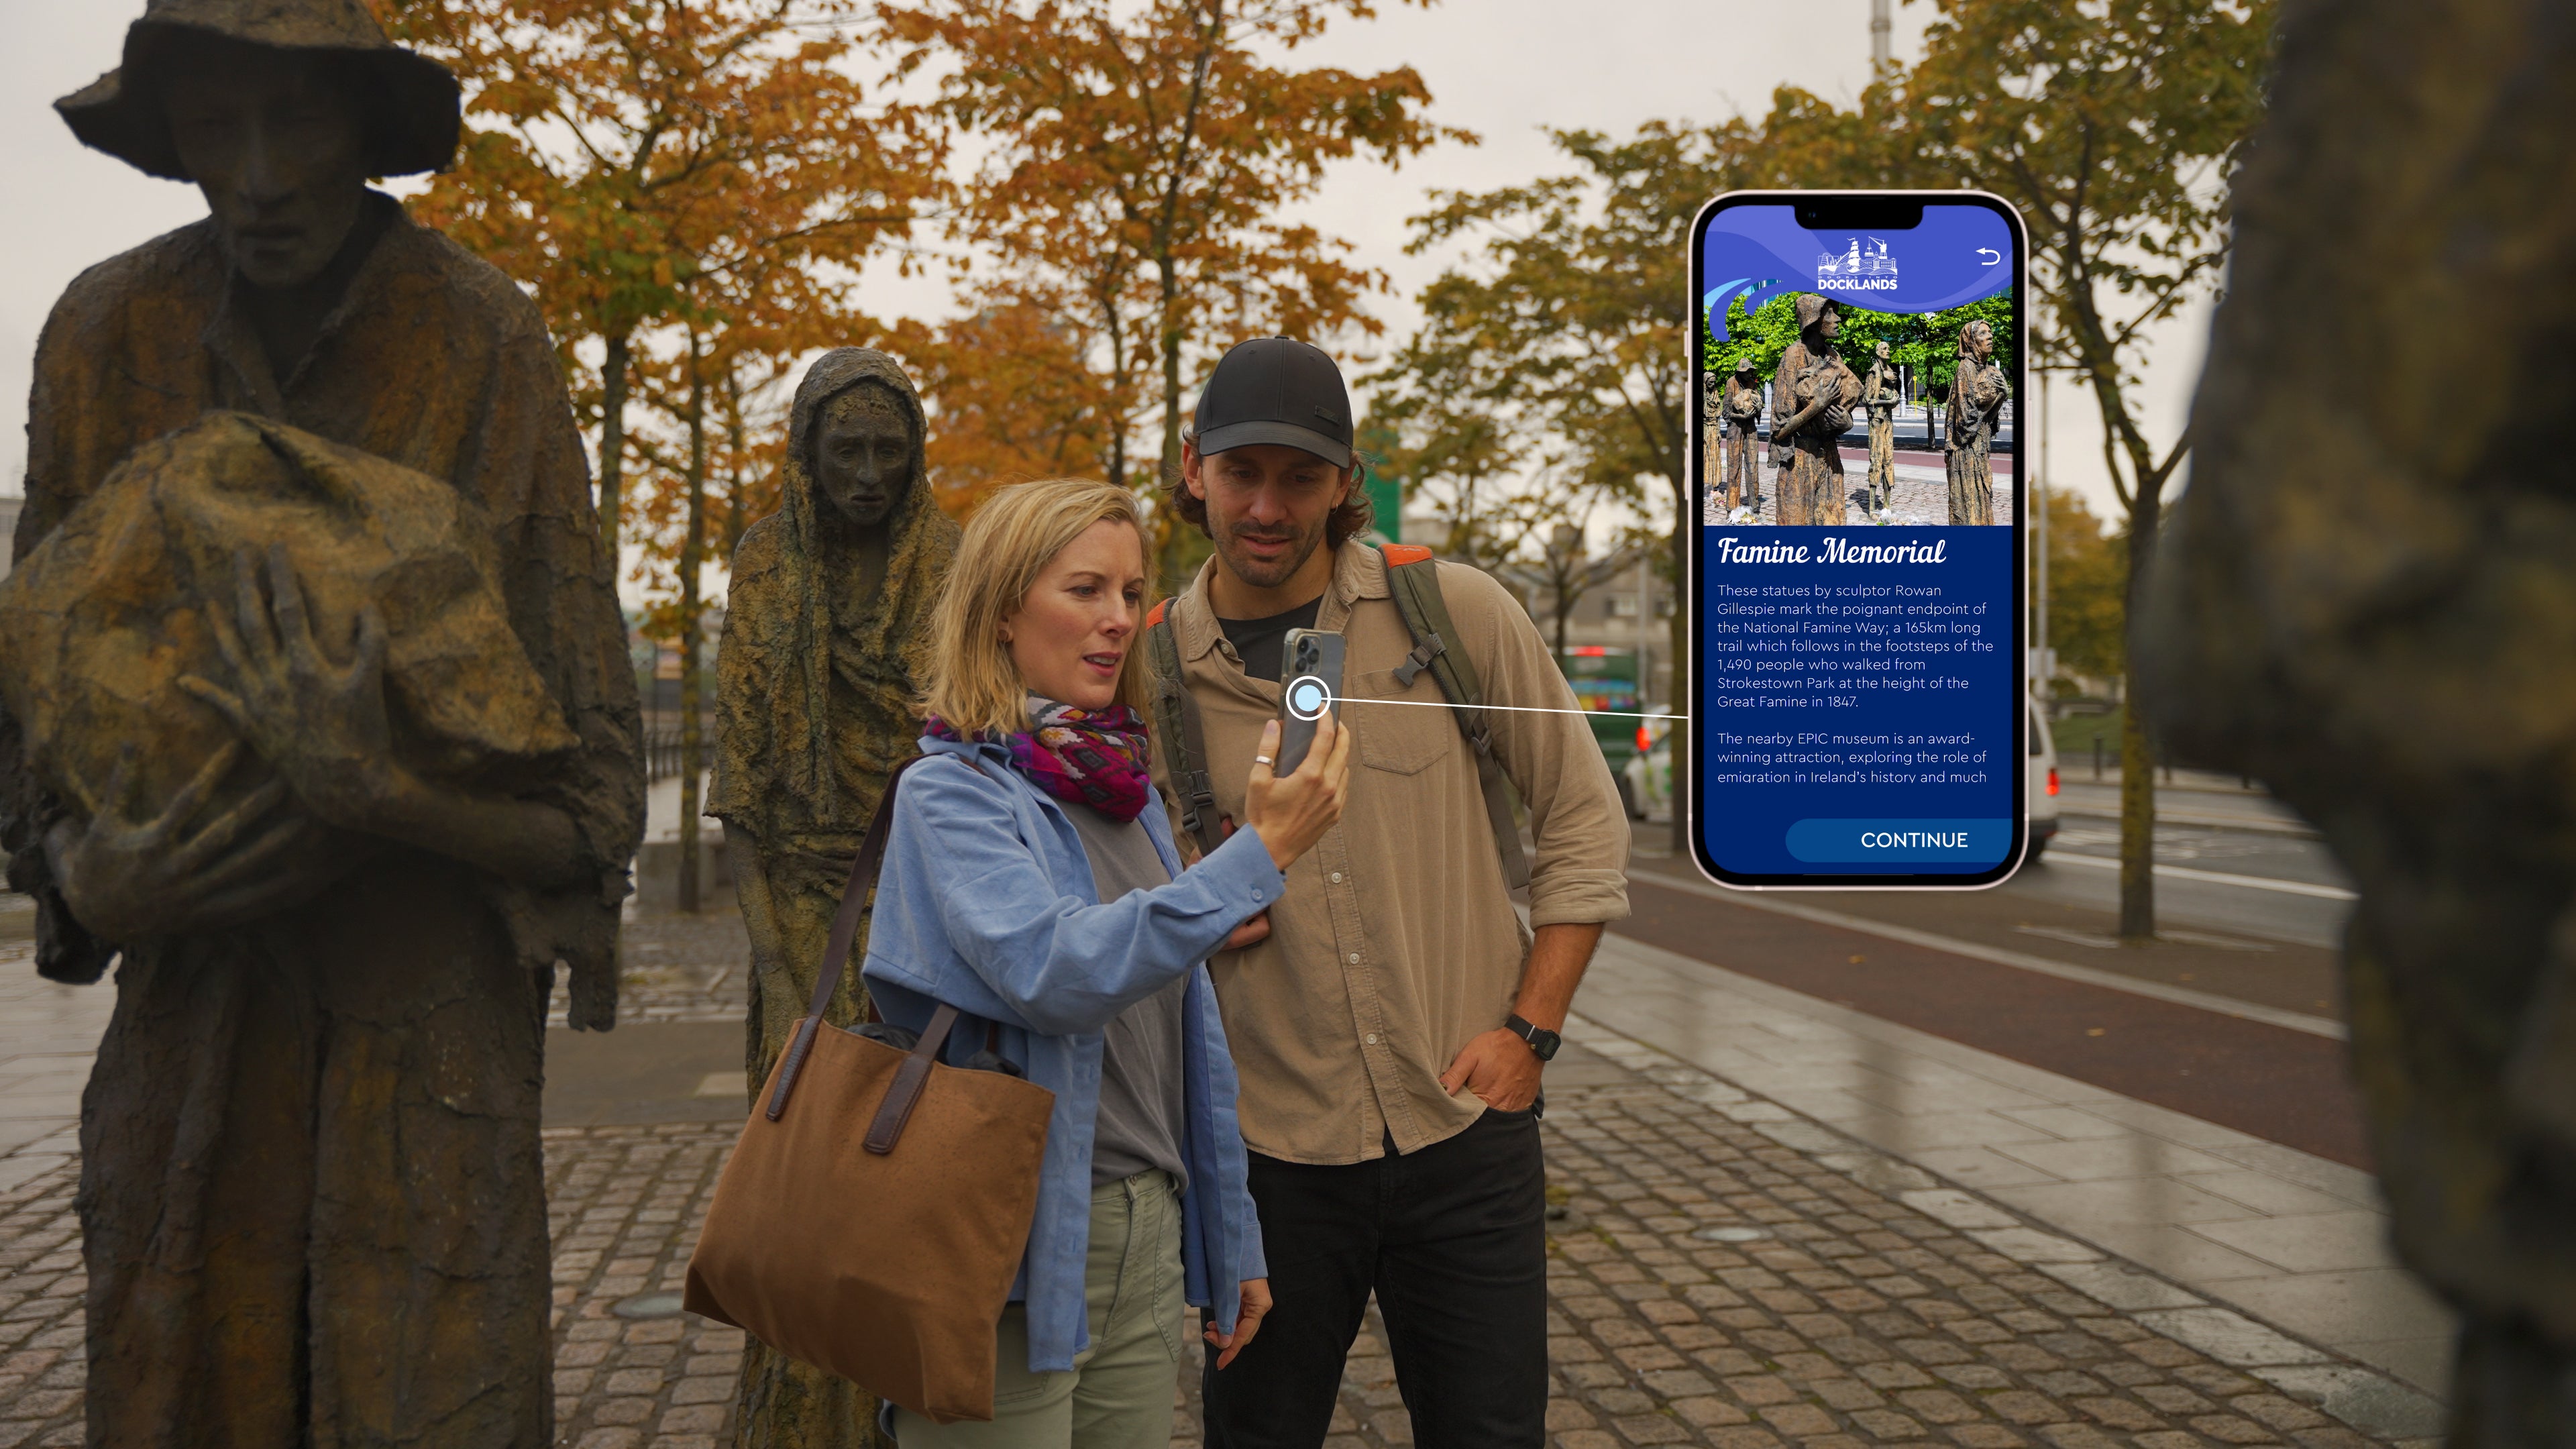 A couple using the app by the Famine Memorial in Dublin City